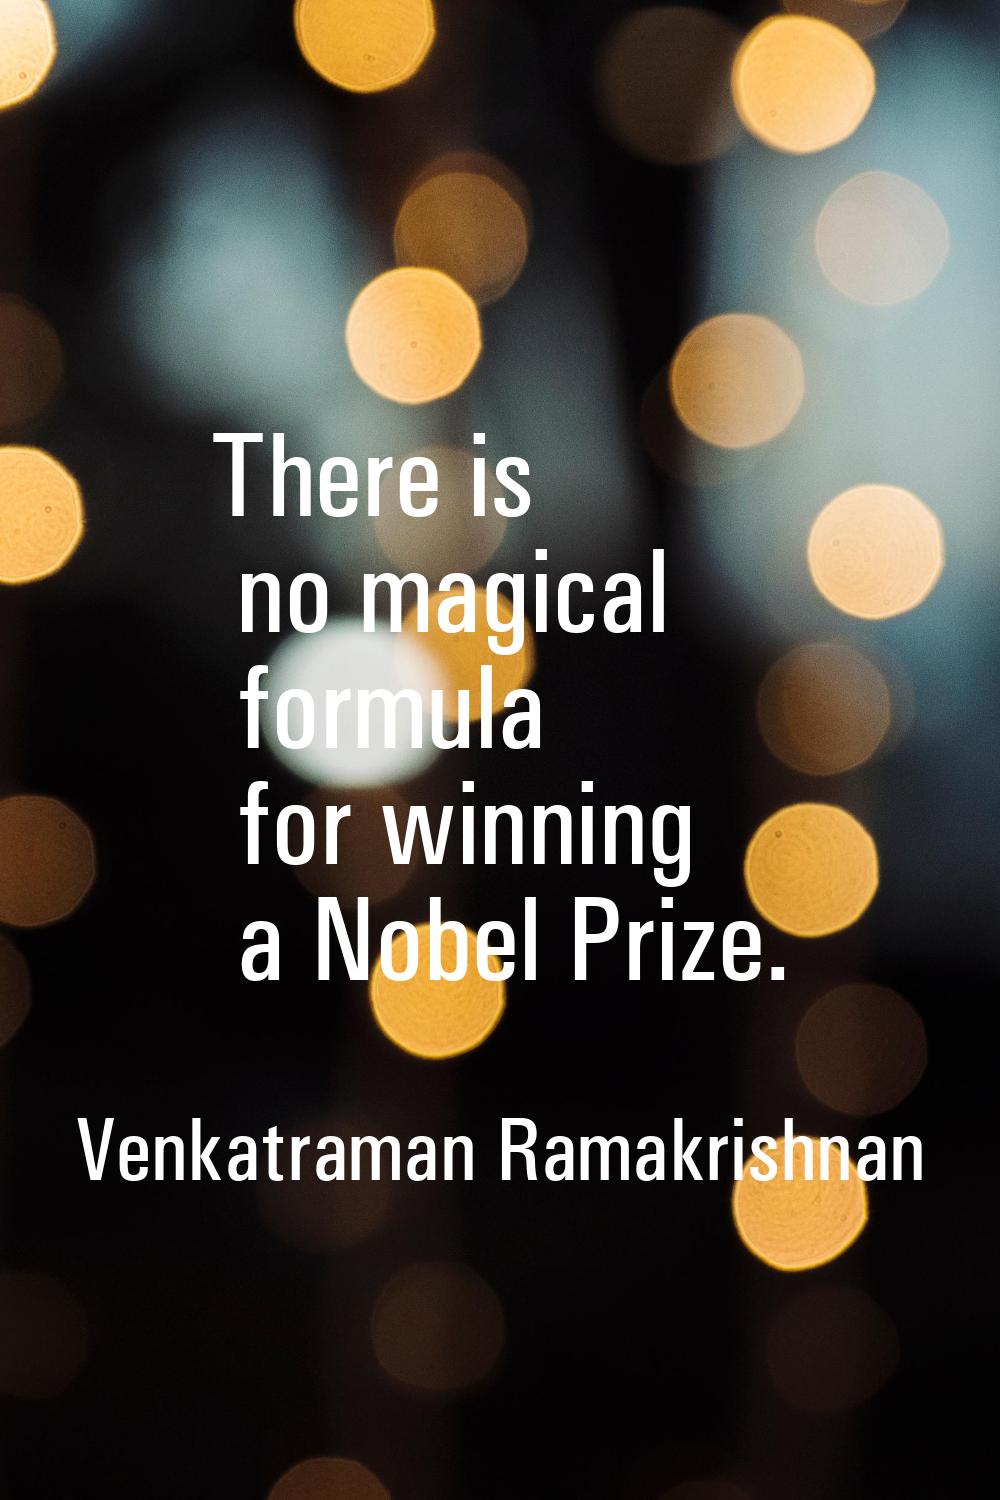 There is no magical formula for winning a Nobel Prize.